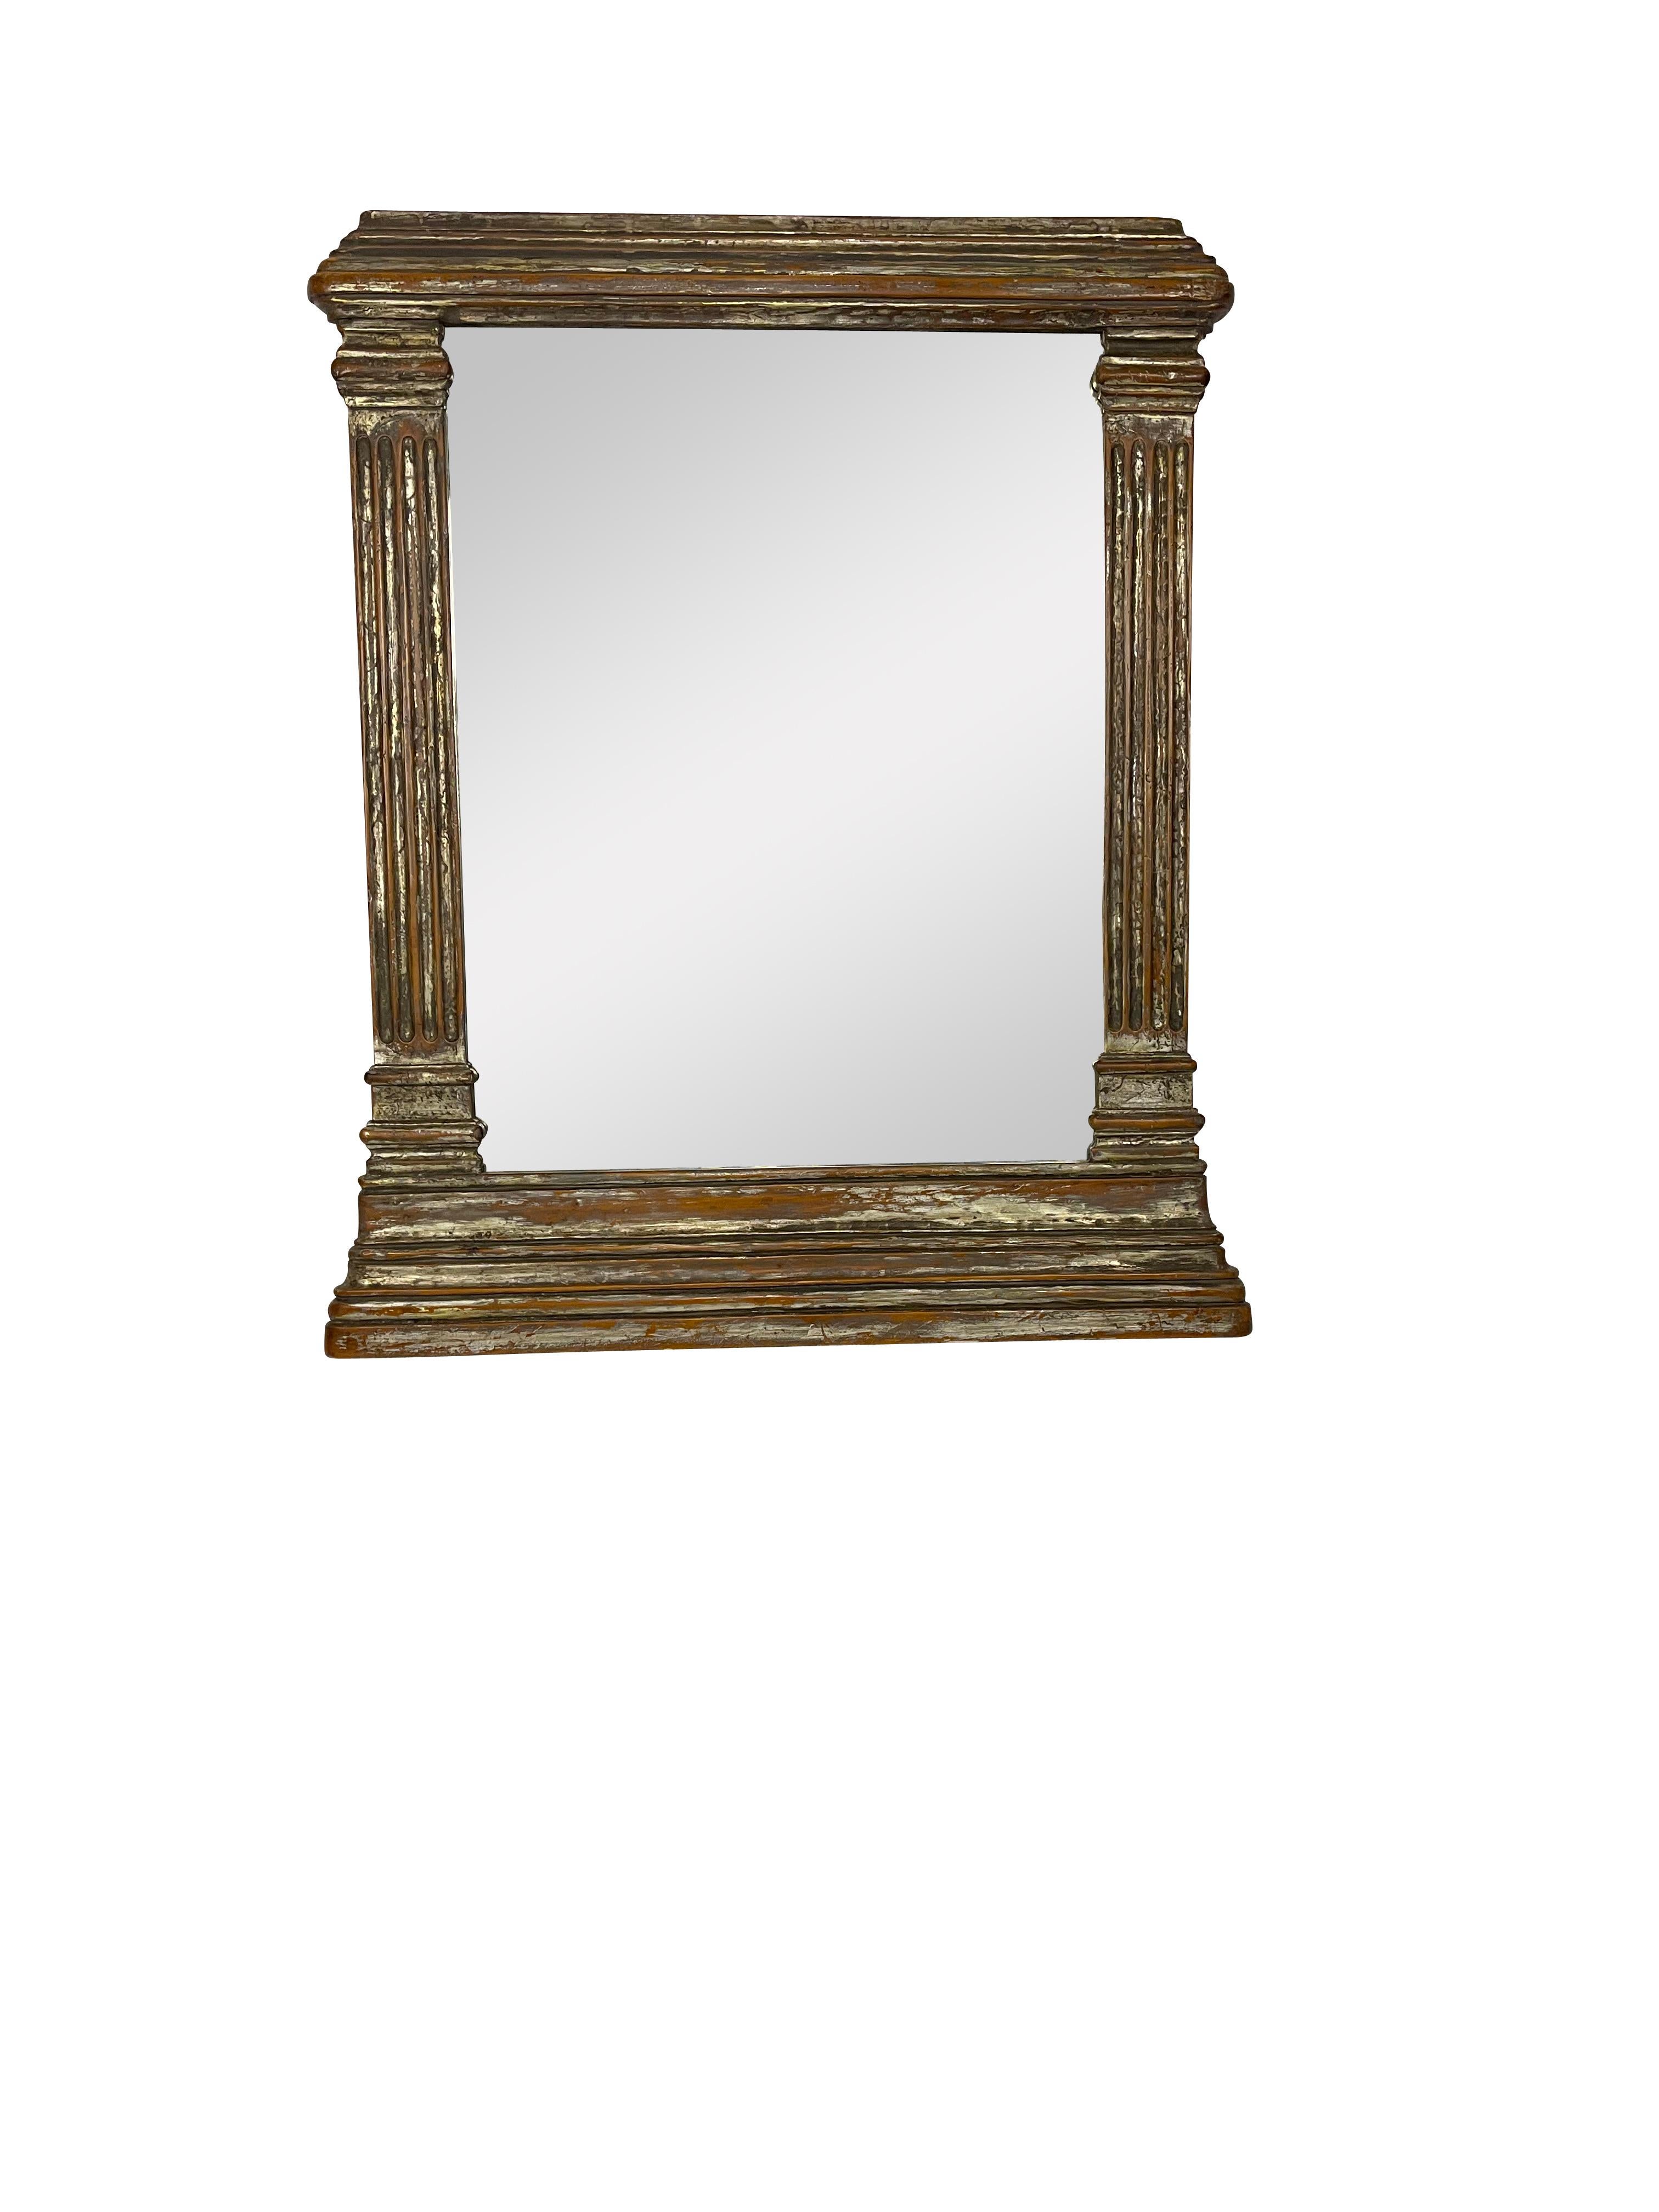 Classical Roman  Neoclassical Style Gilt and Silvered Mirror with Carved Columns For Sale